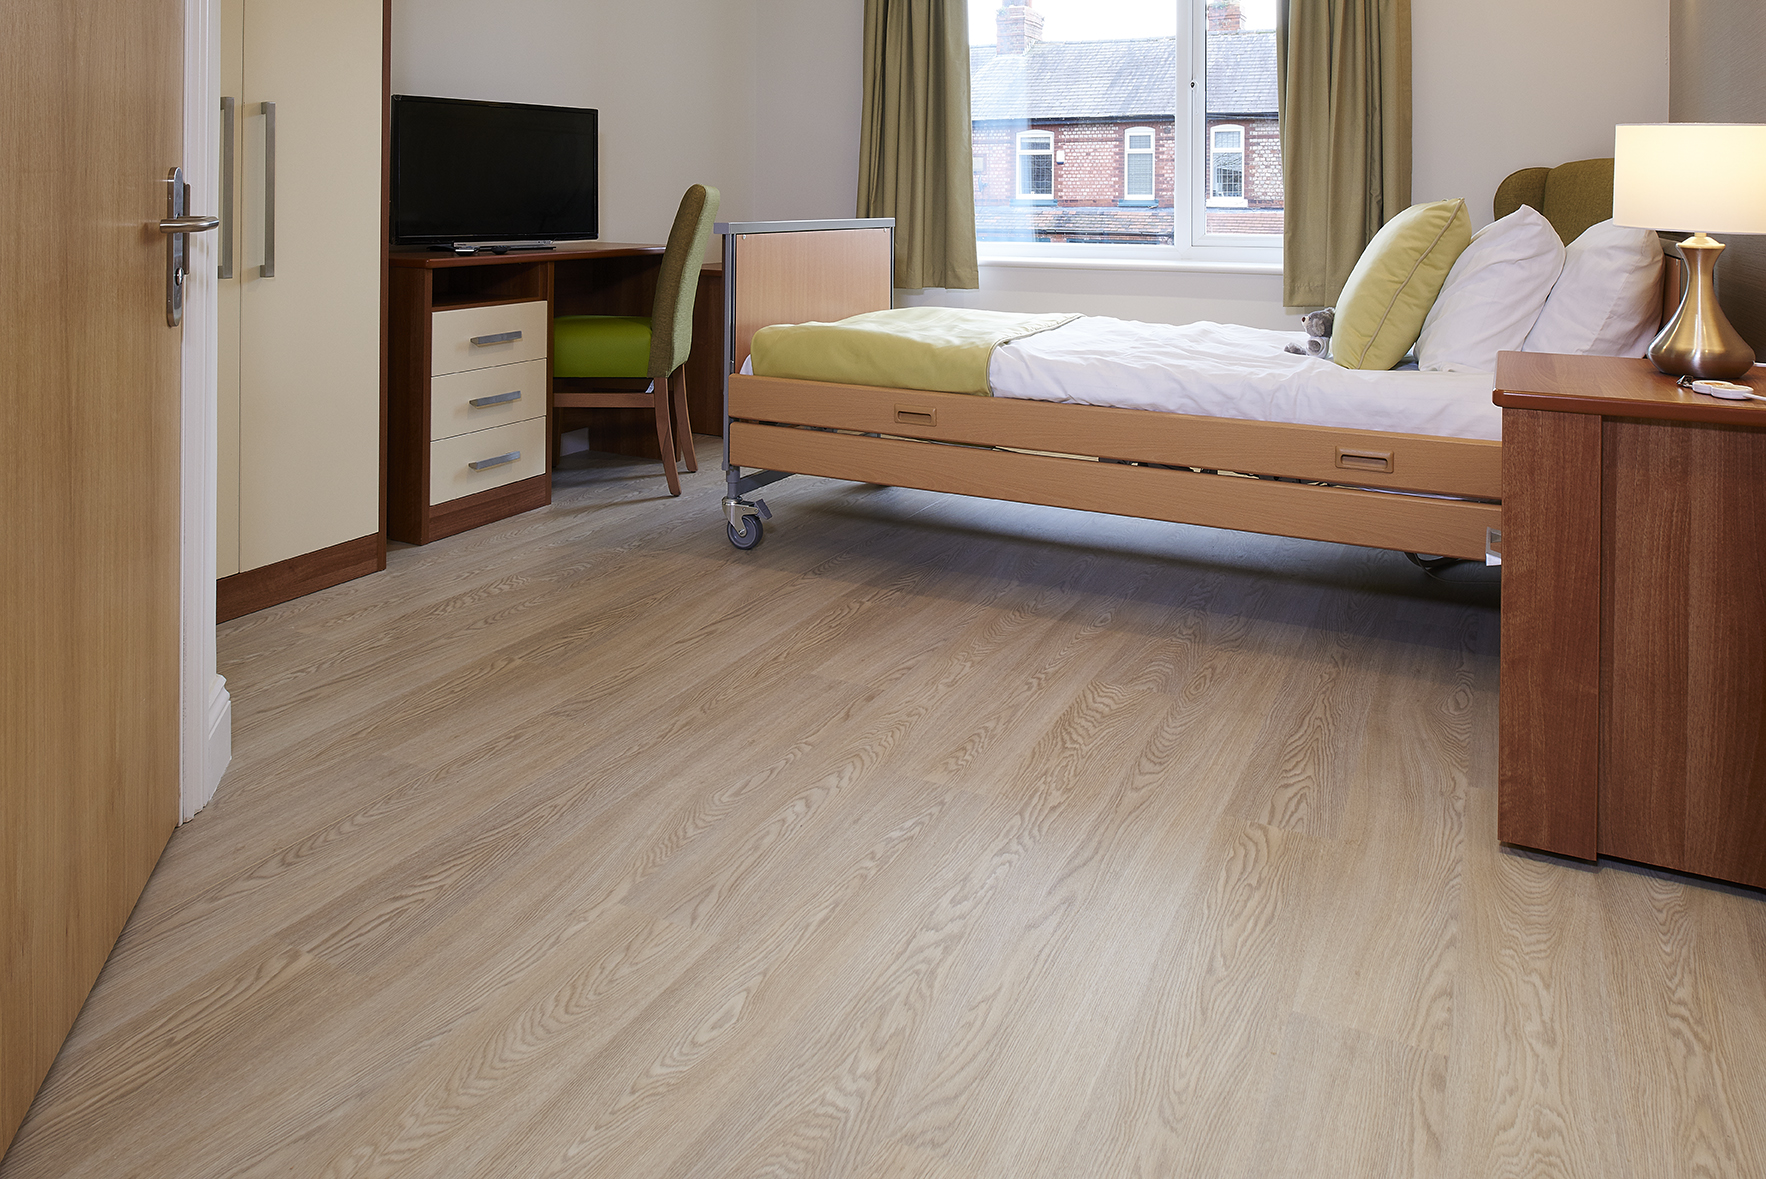 Bowfell House Care Home benefits from a Polyflor flooring solution